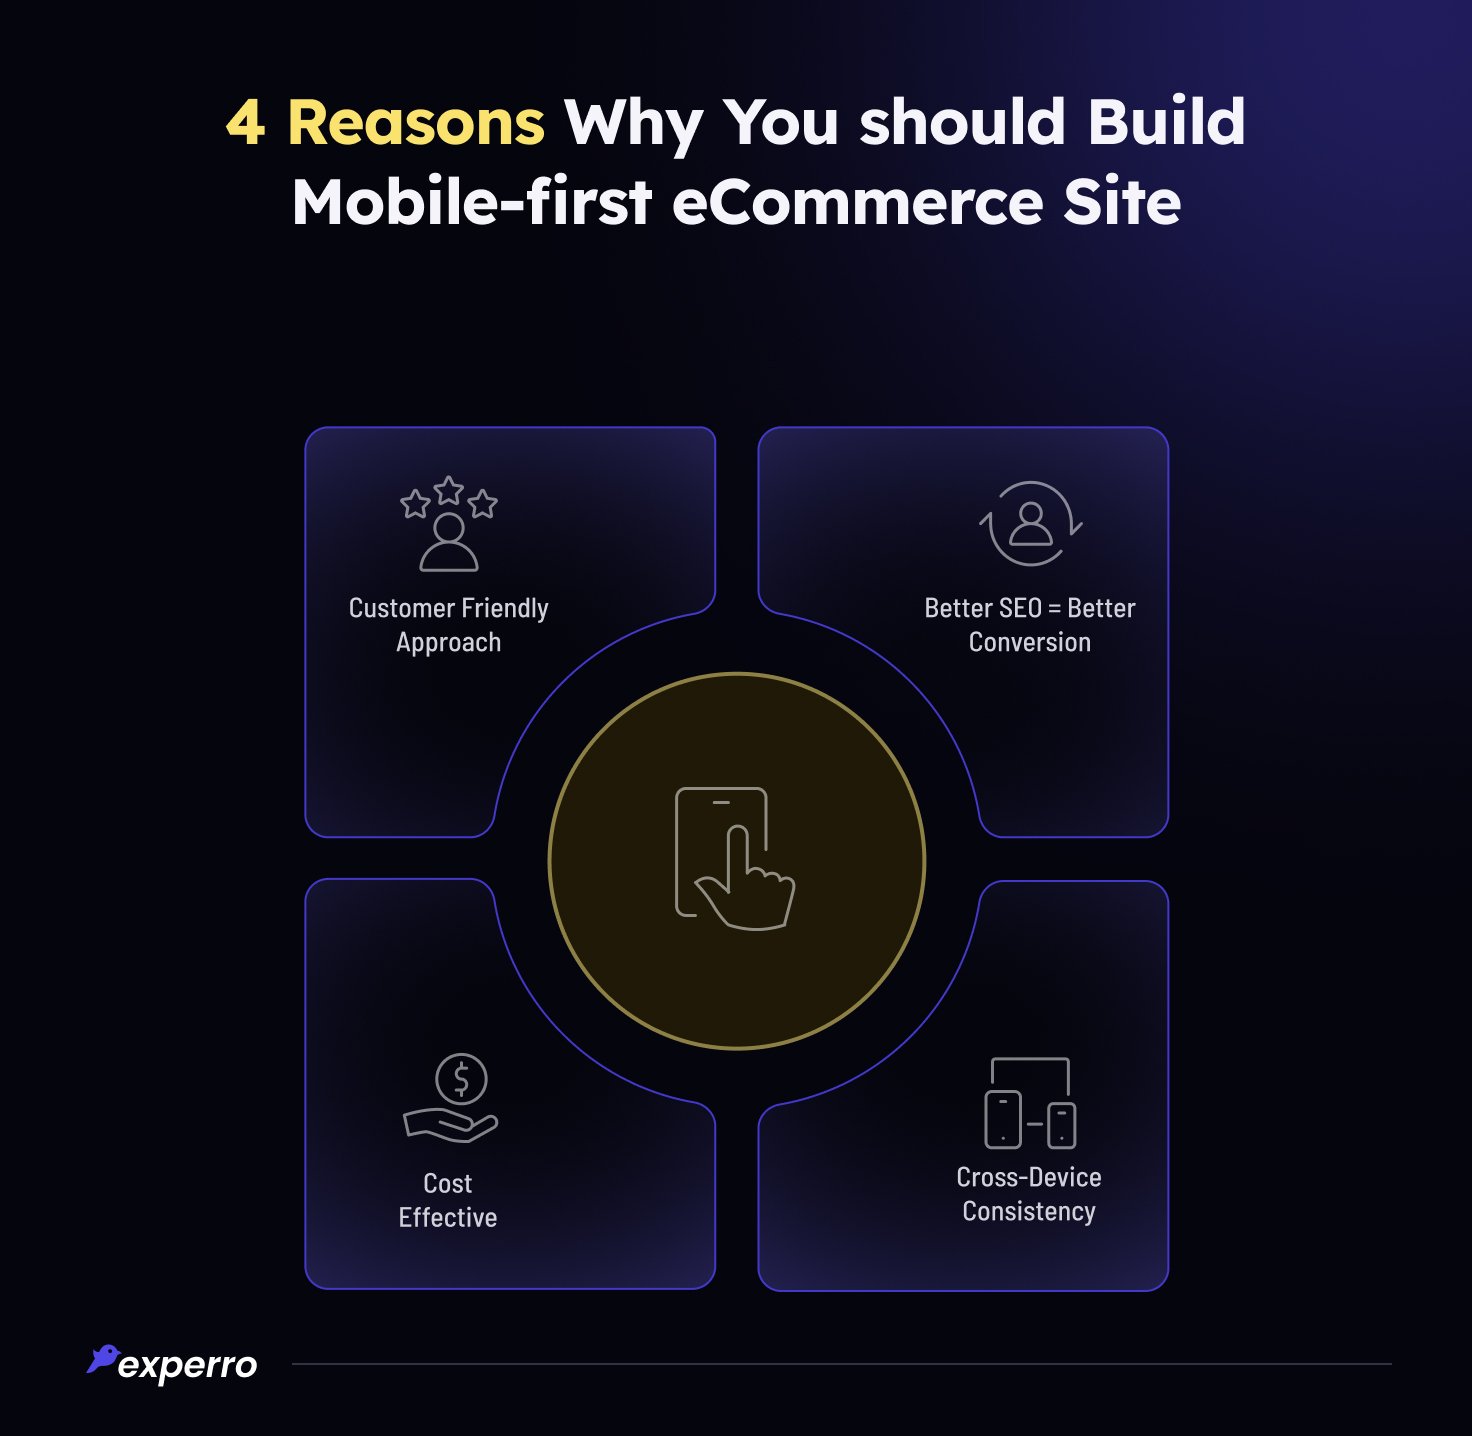 4 Reasons To Build Mobile-First eCommerce Site